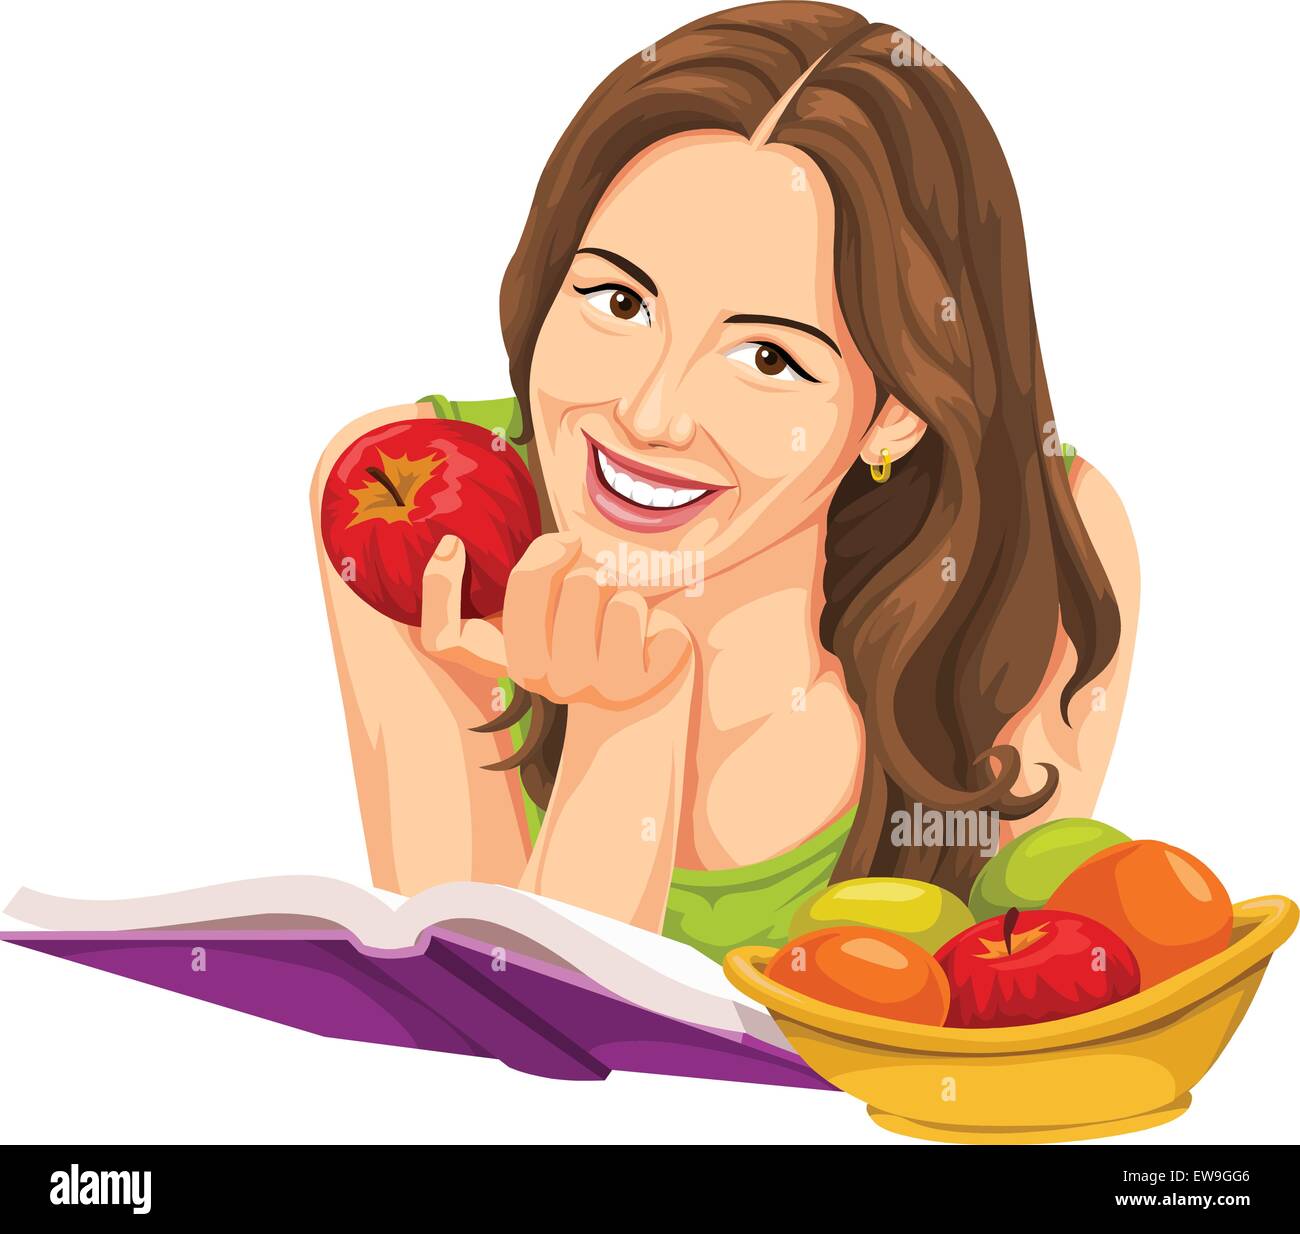 Vector illustration of happy young woman with apple, reading a book. Stock Vector